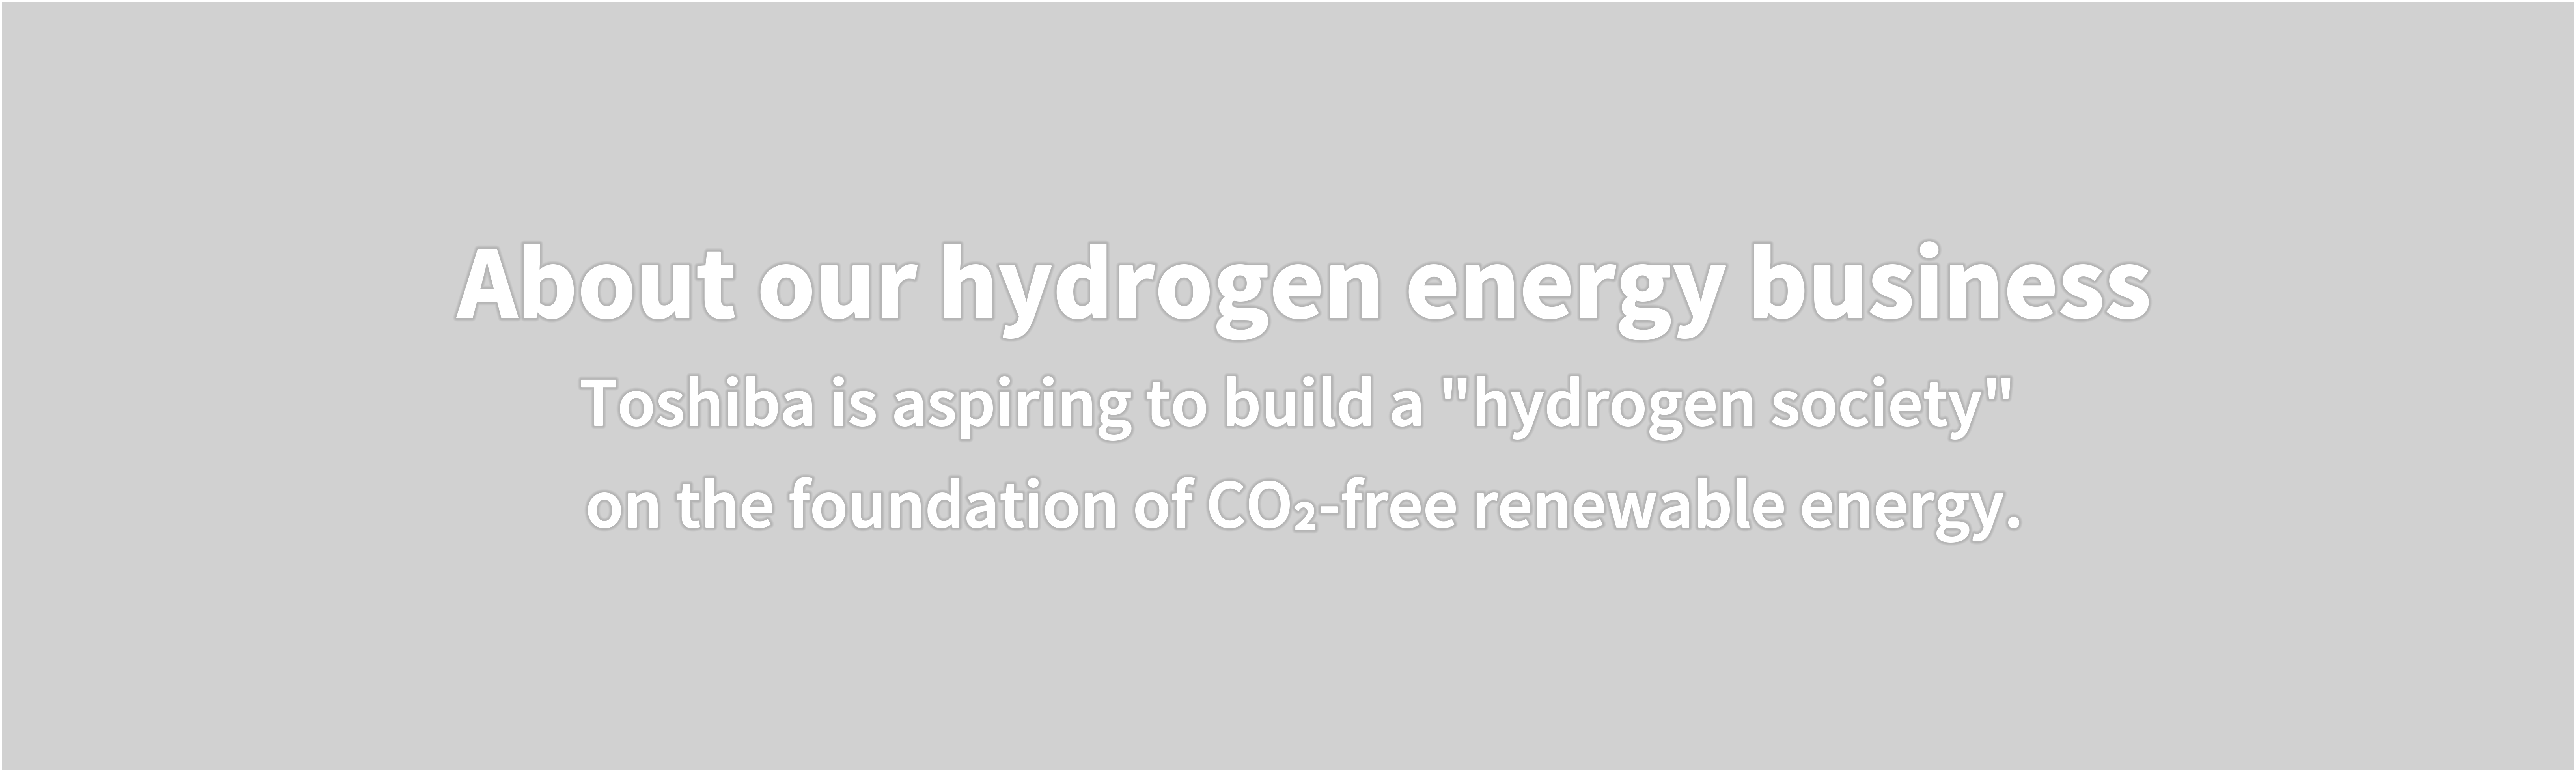 About our hydrogen energy business  Toshiba is aspiring to build a "hydrogen society"  on the foundation of CO₂-free renewable energy.